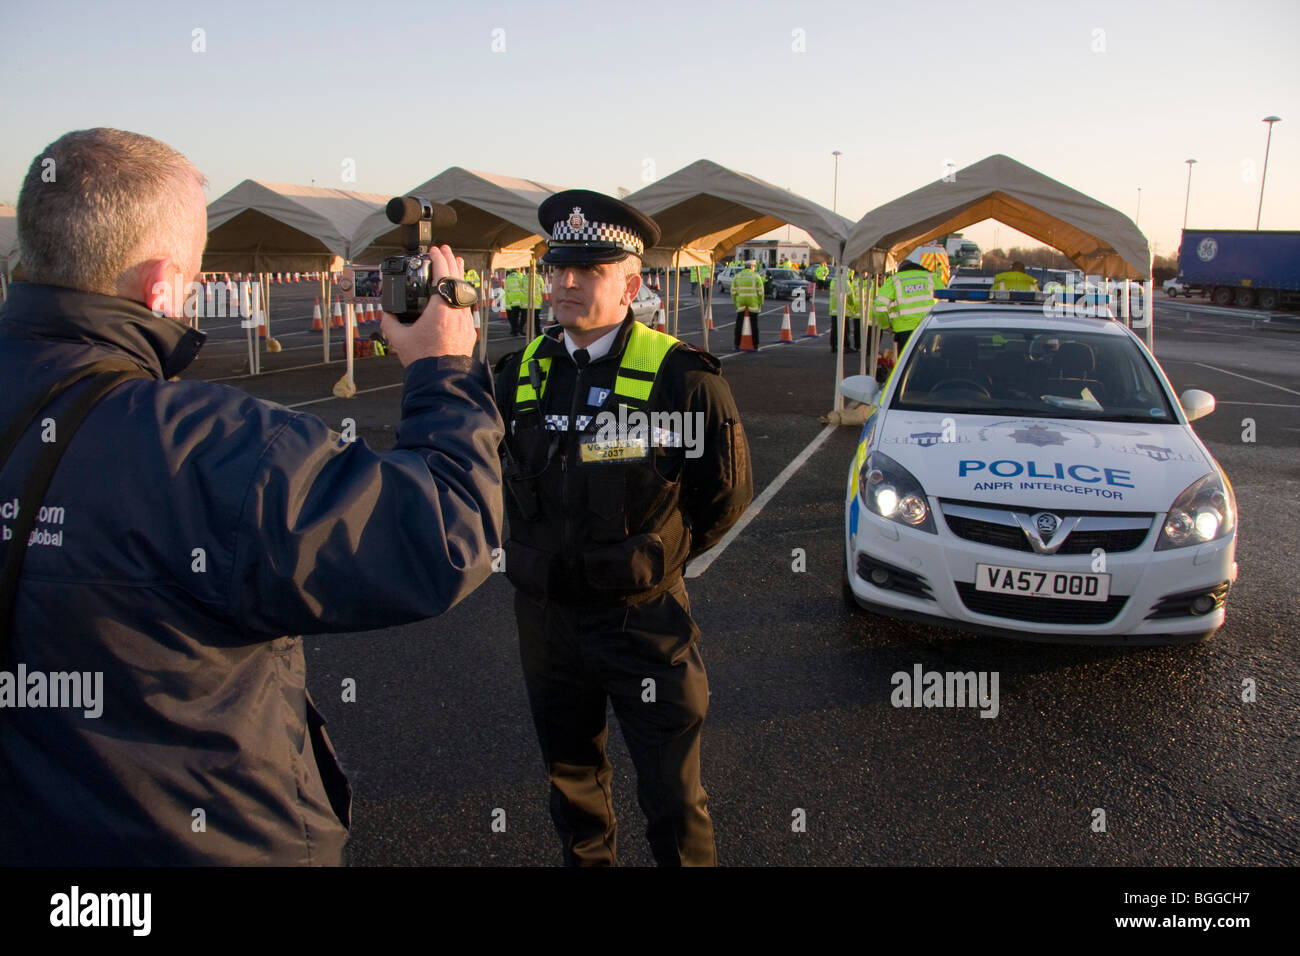 Essex police inspector being interviewed by yourthurrock.com Stock Photo